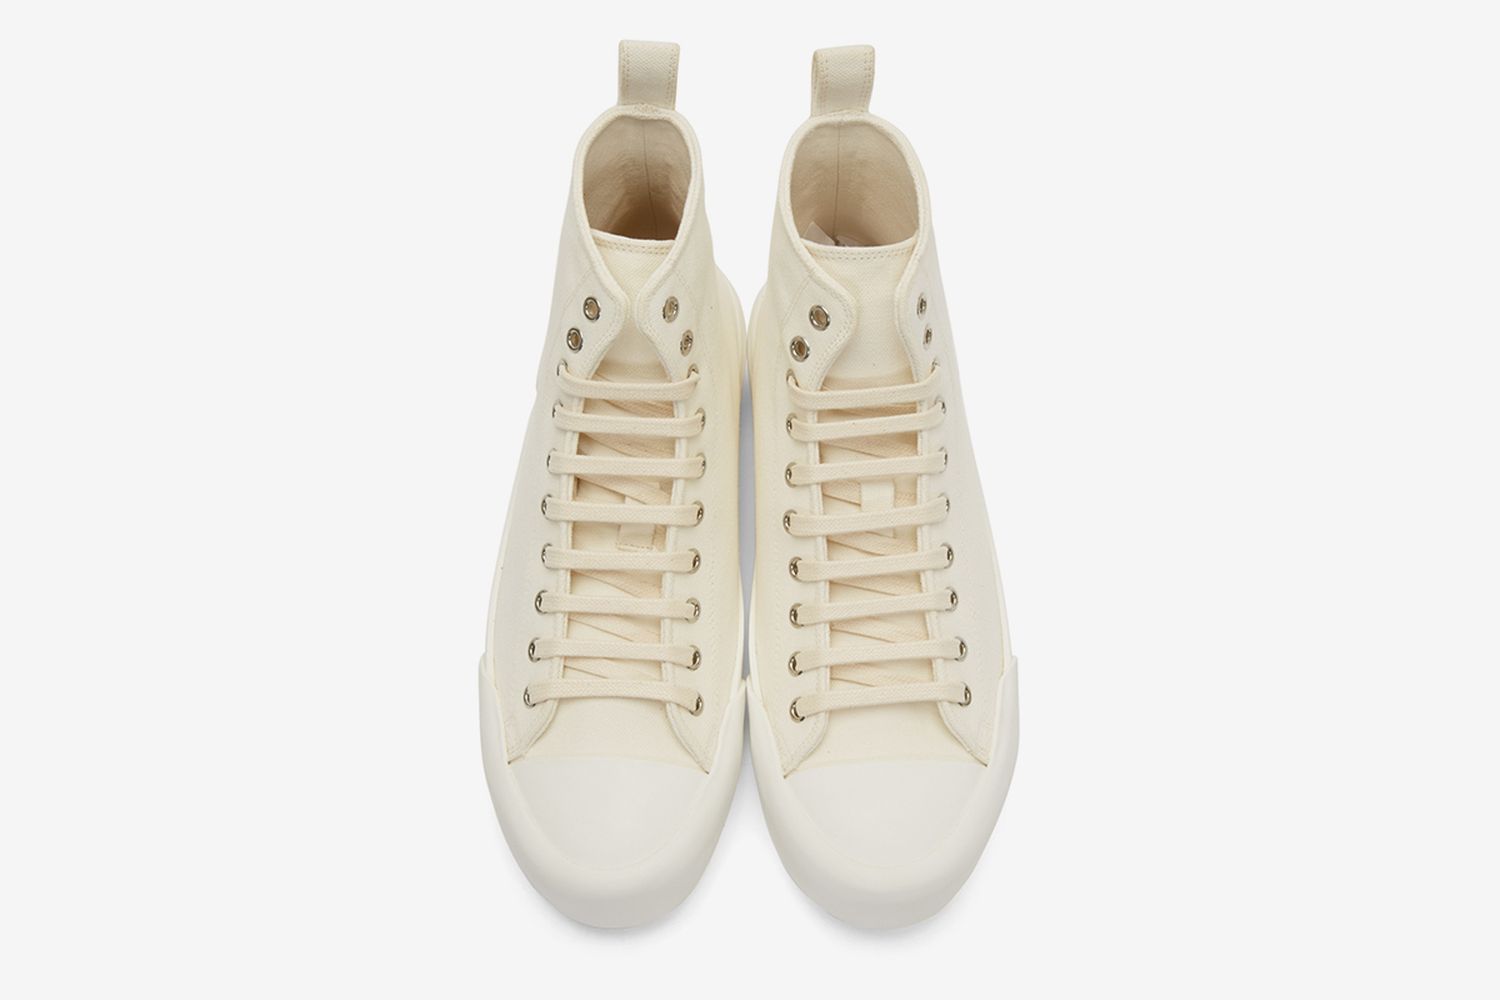 Canvas High-Top Sneakers